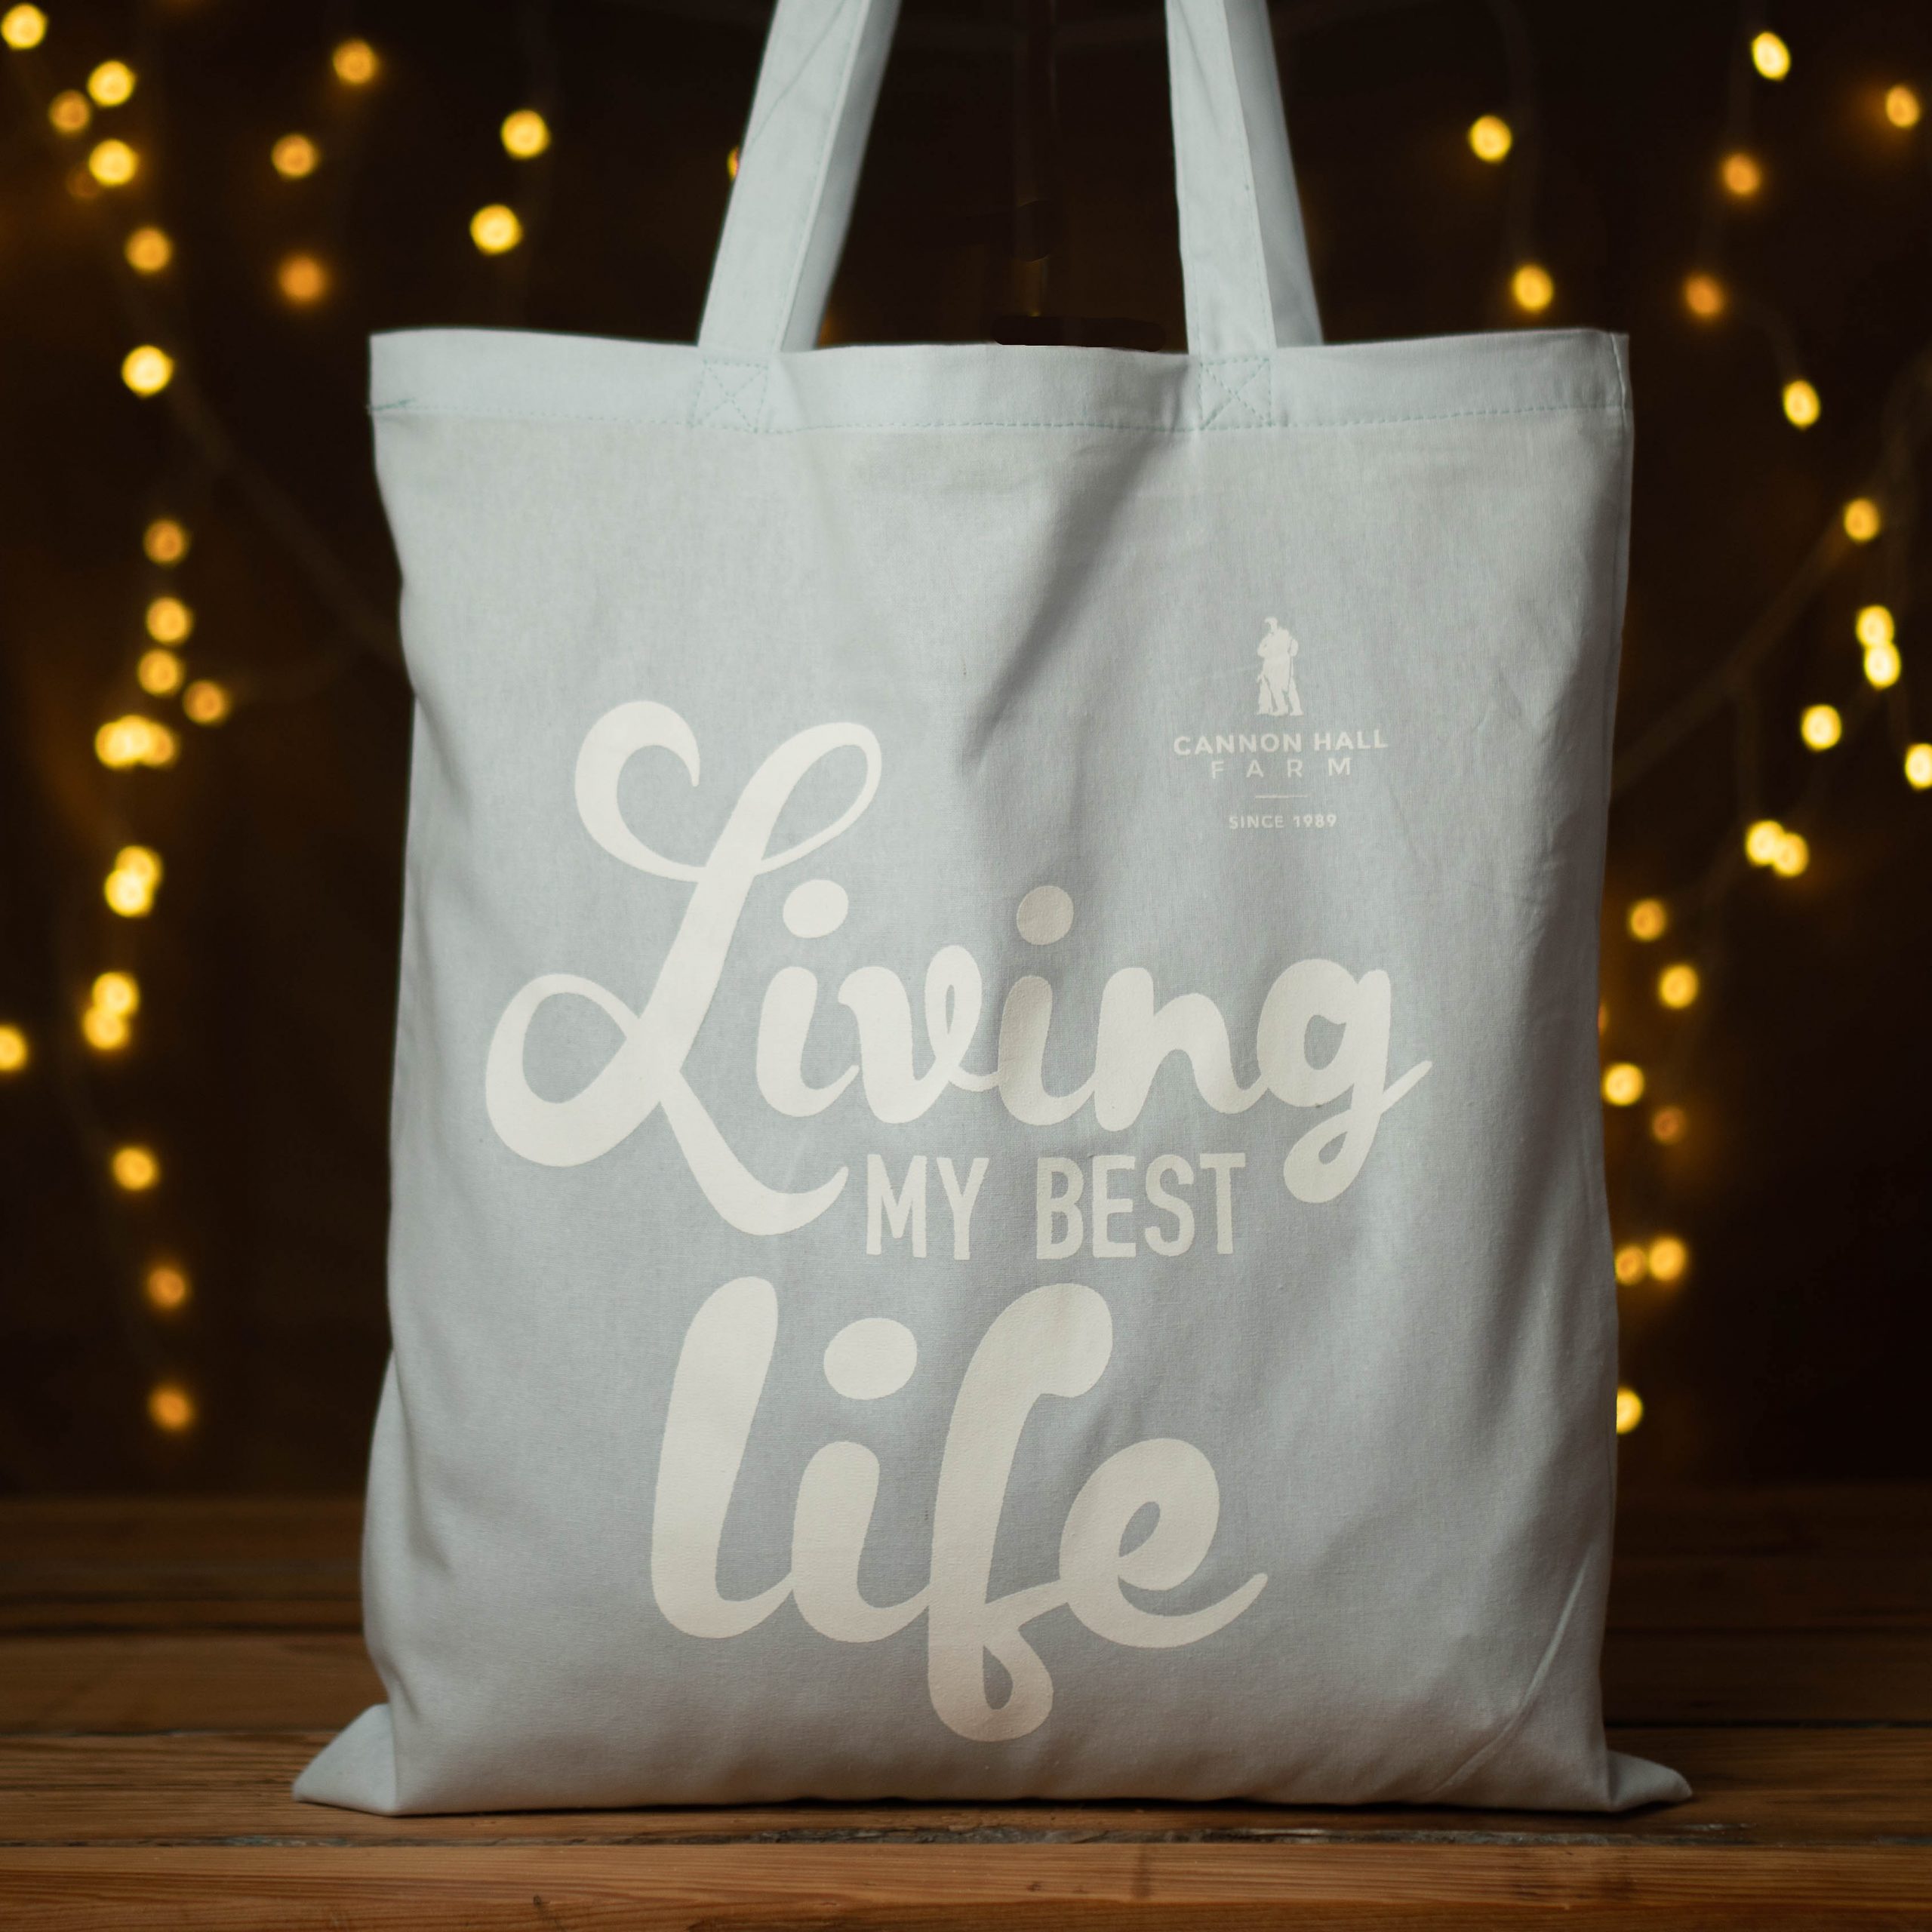 Amazon.com: Christian Sayings Canvas Tote Bags for Women Cute Graphic  Shoulder Bags Reusable Shopping Bag Christian Gift White : Home & Kitchen